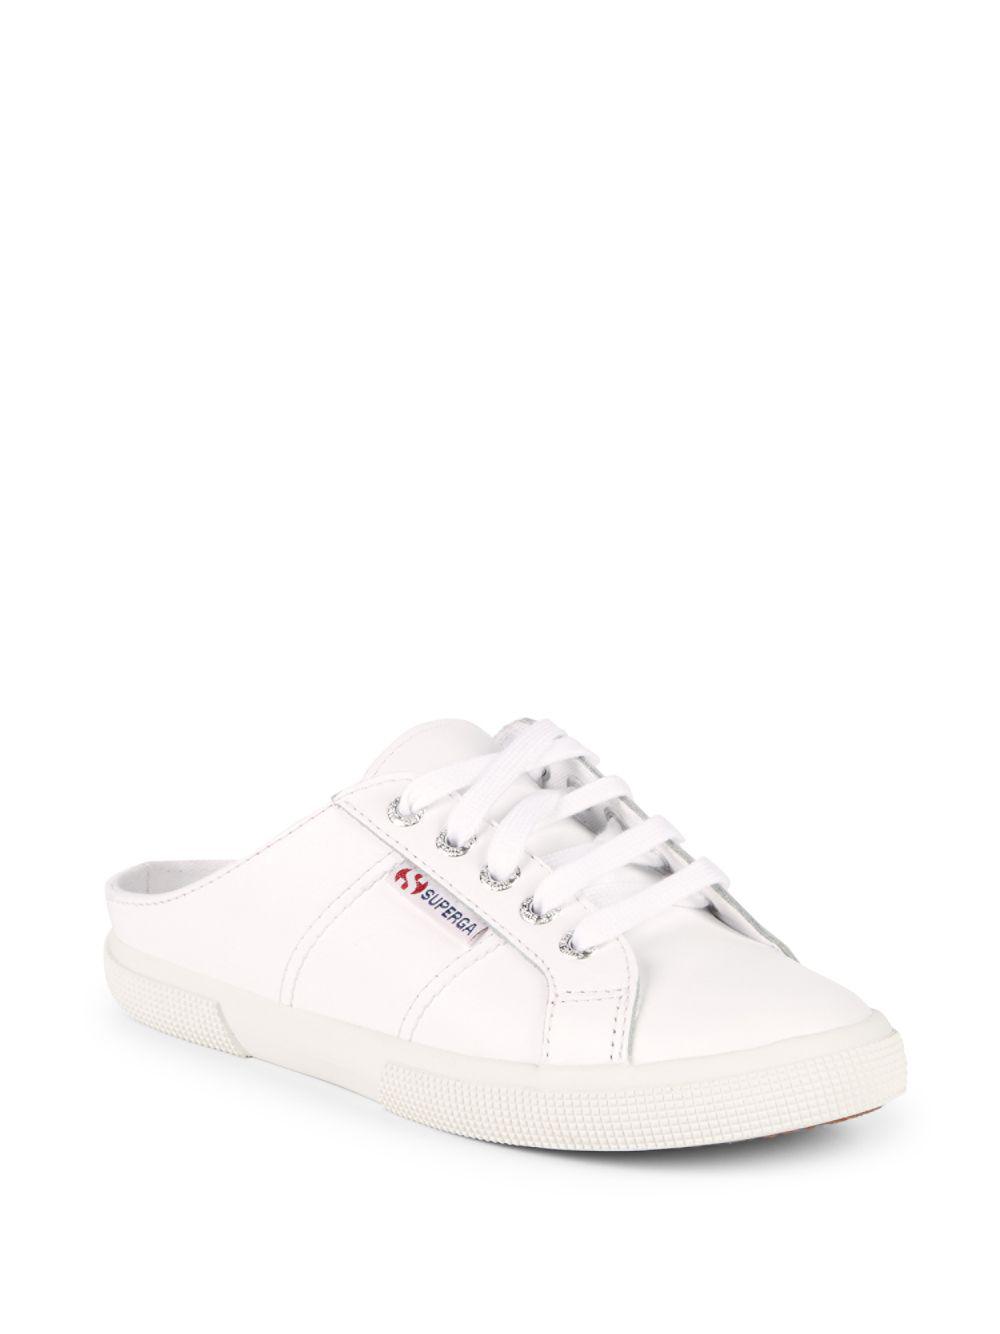 Superga Leather Backless Sneakers in White | Lyst